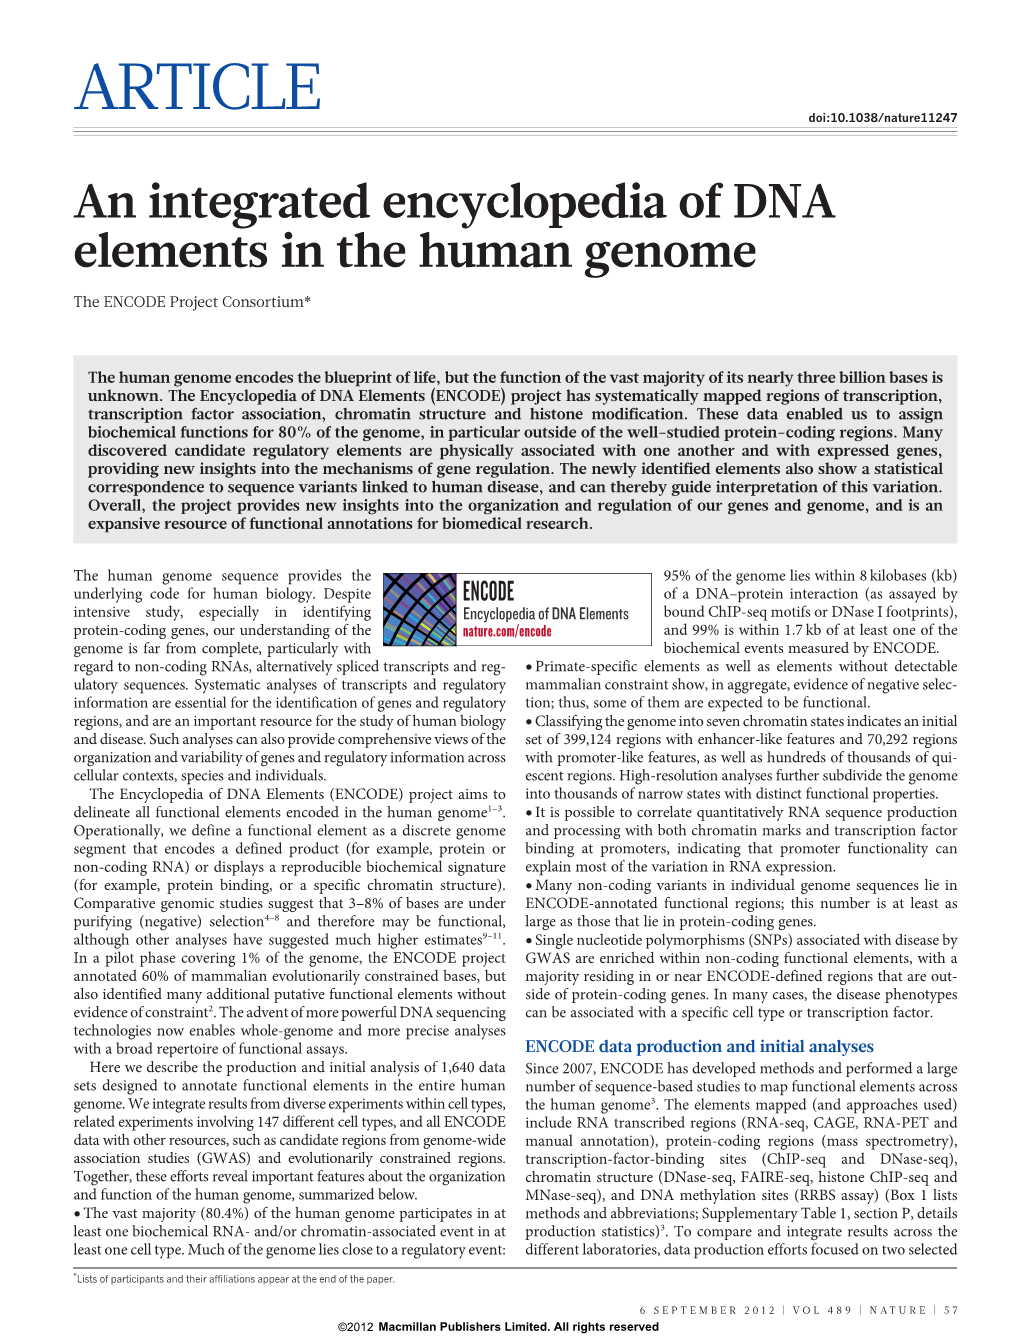 An Integrated Encyclopedia of DNA Elements in the Human Genome